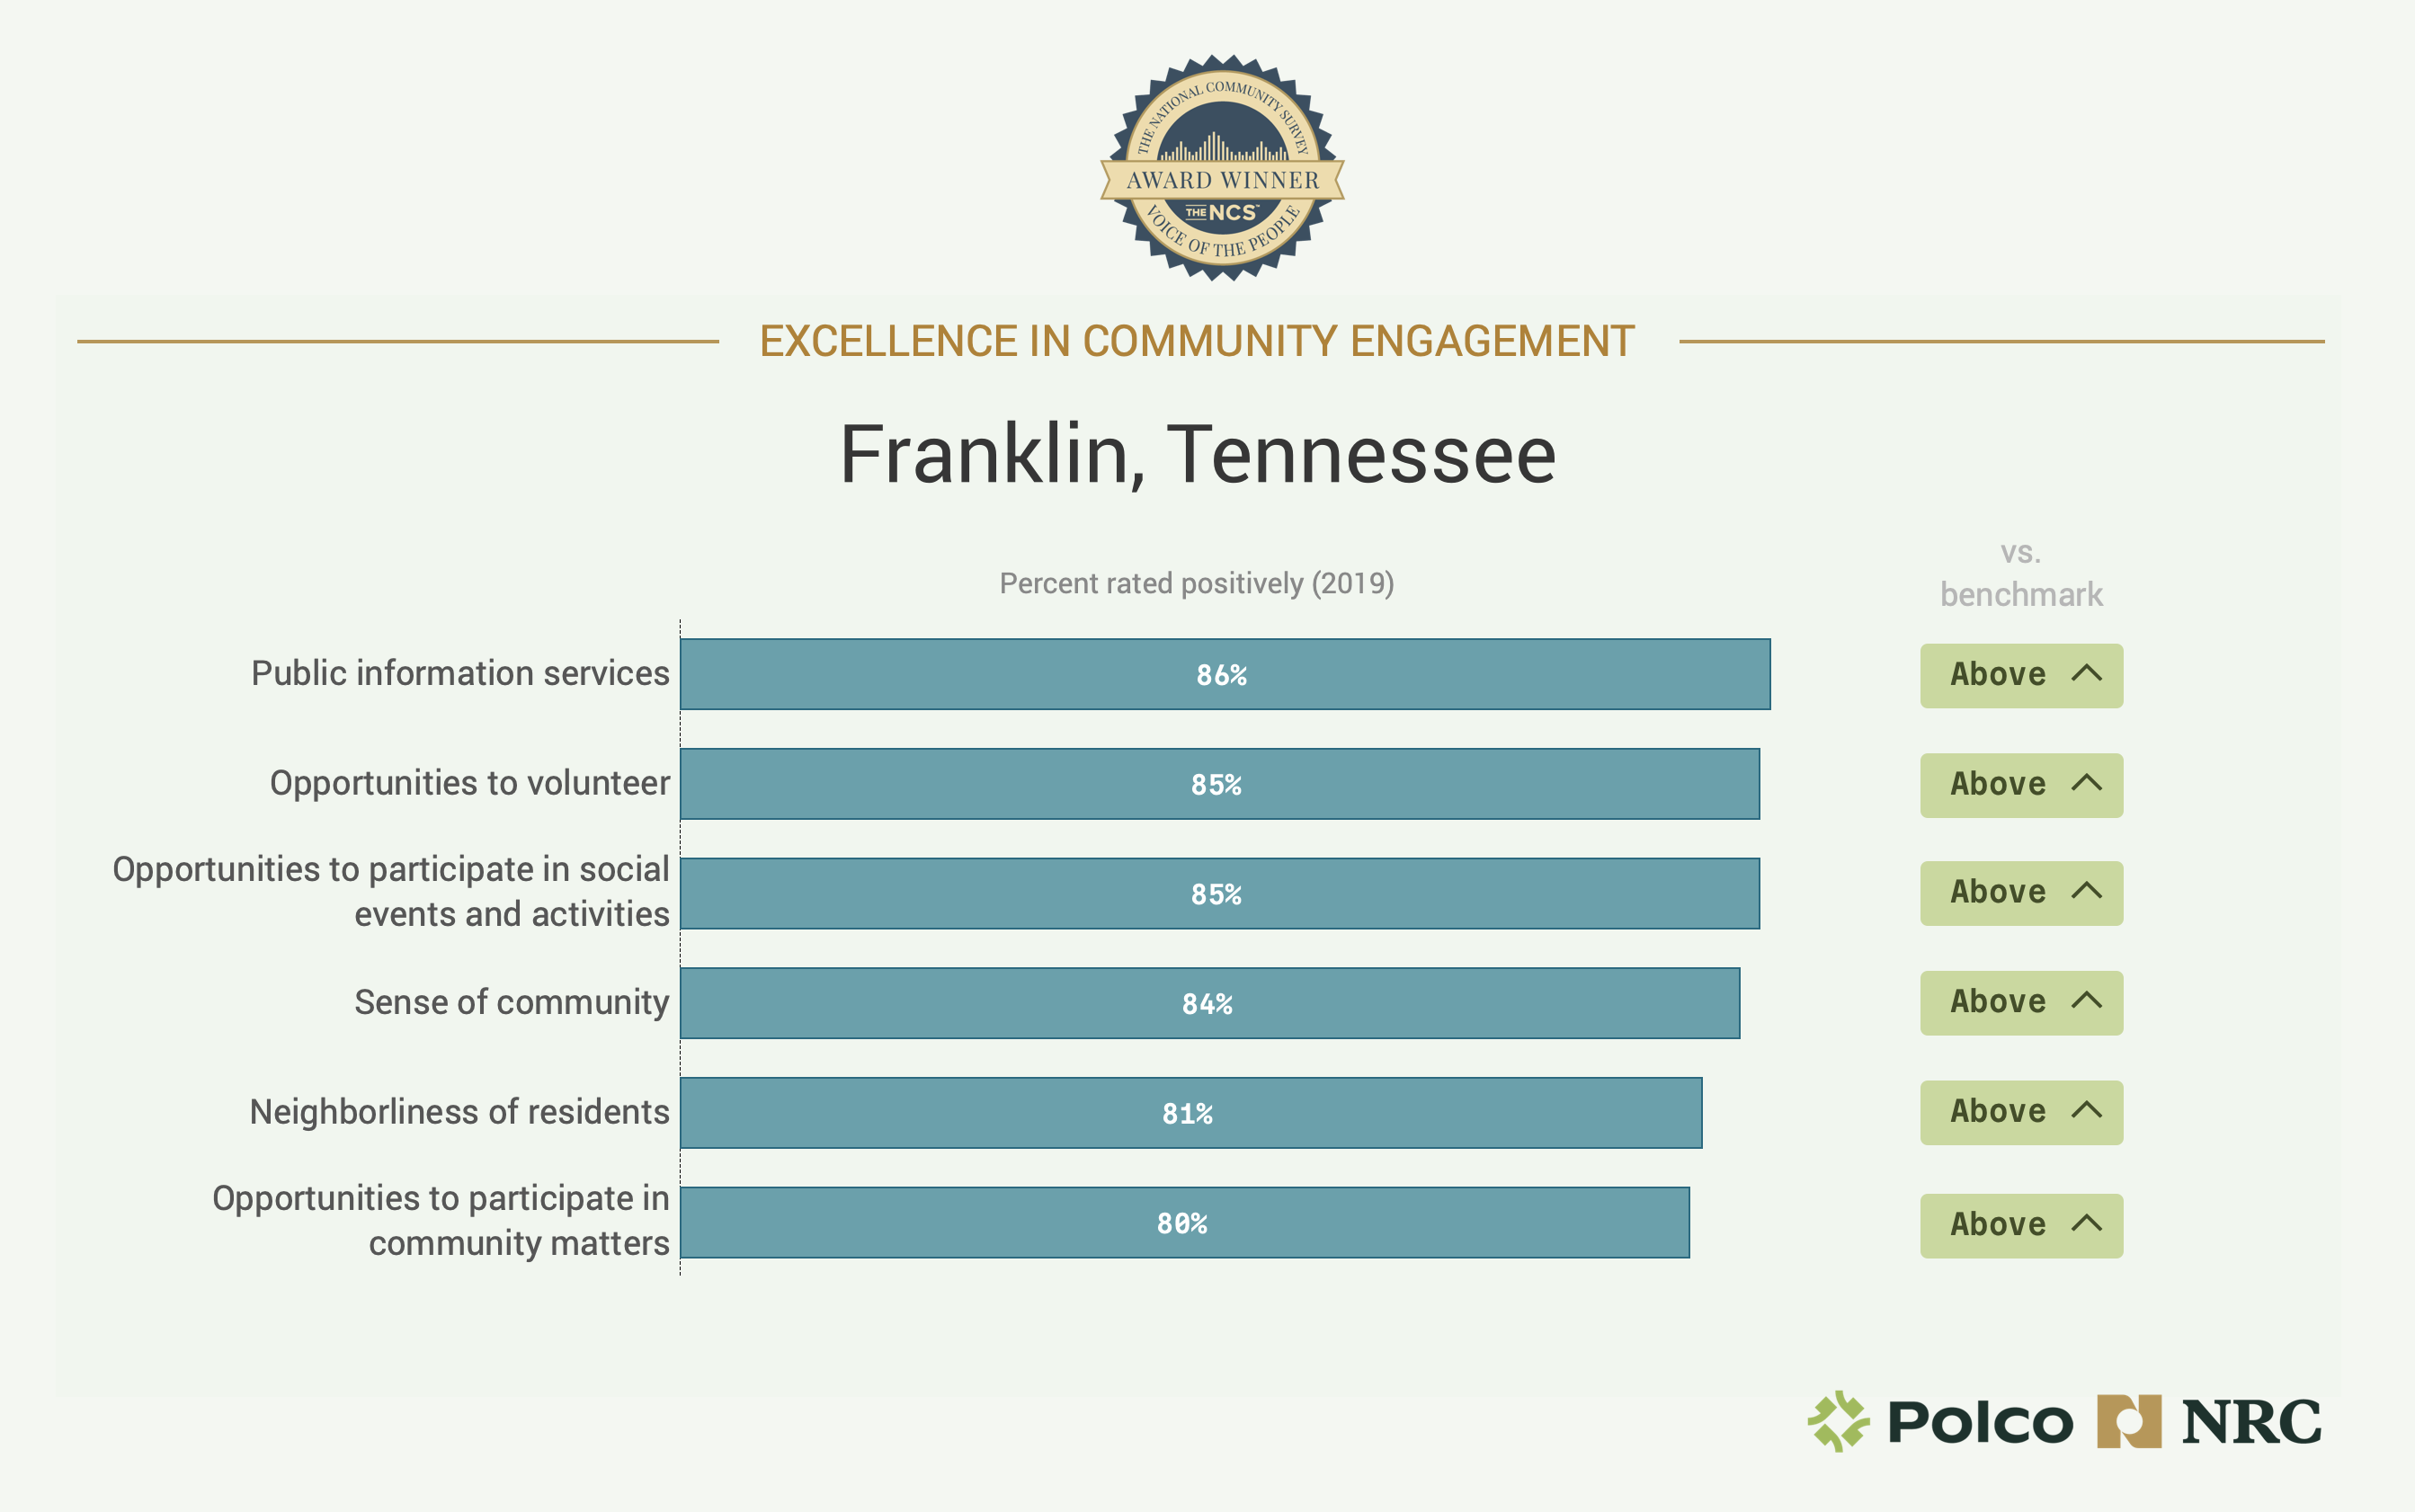 Chart showing Franklin, Tennessee's Excellence in Community Engagement